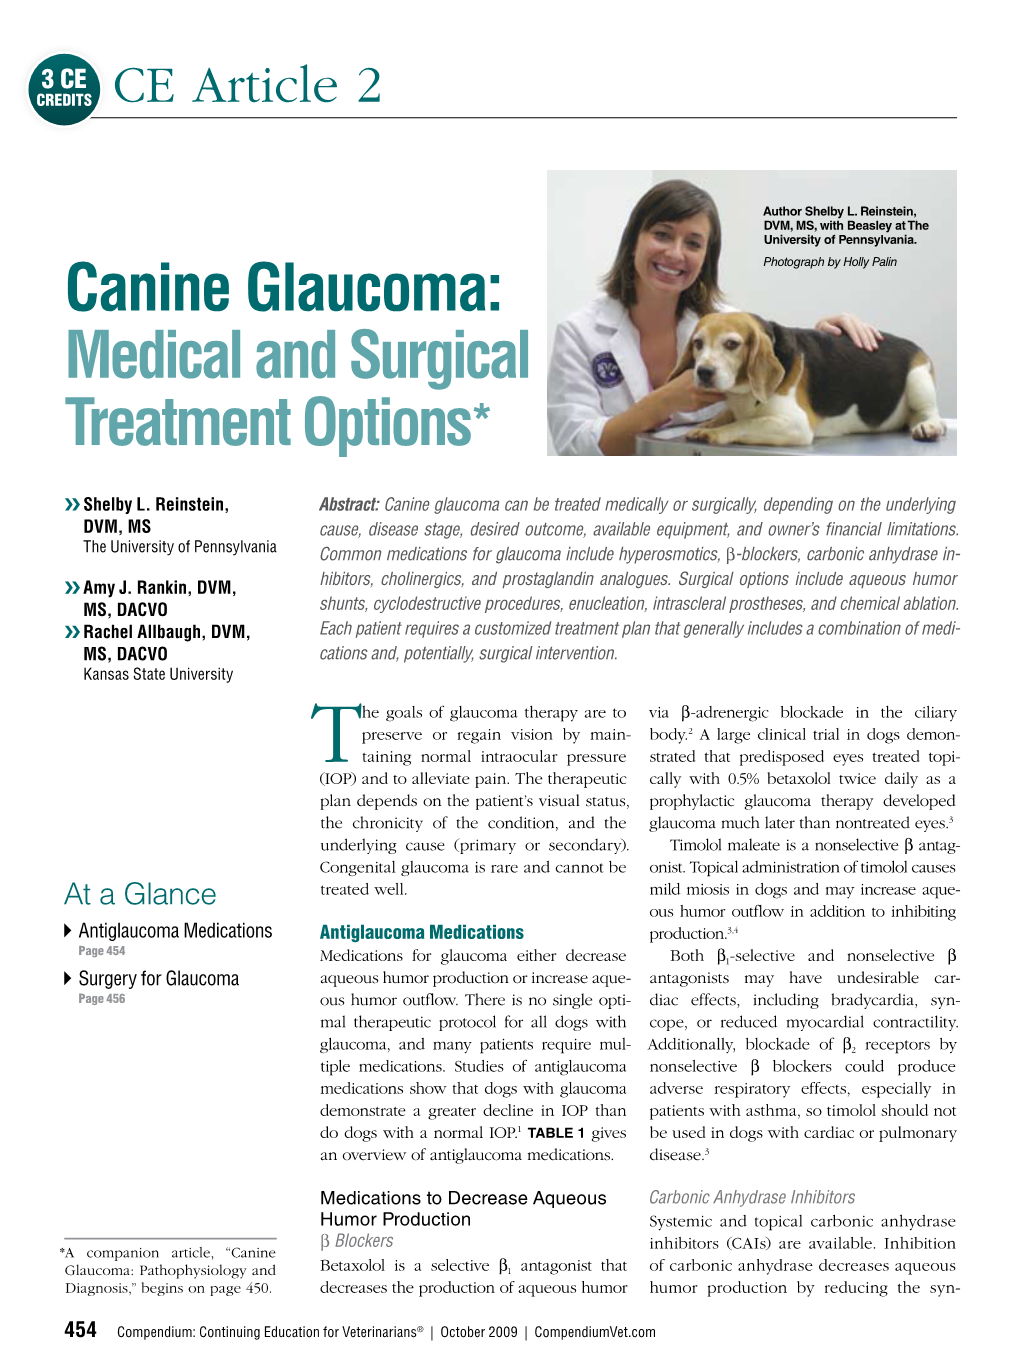 Canine Glaucoma: Medical and Surgical Treatment Options*